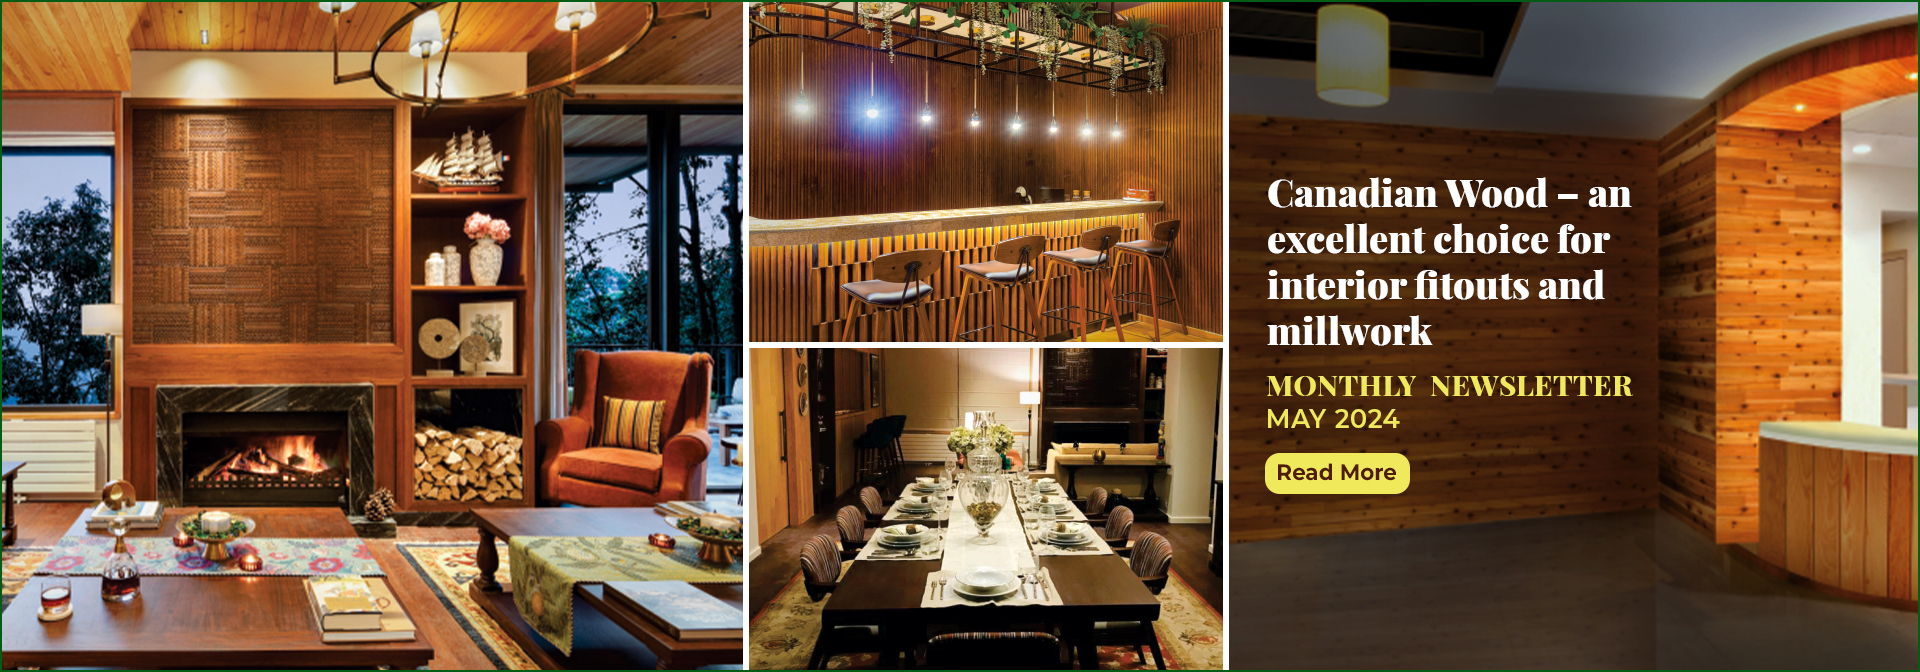 Canadian wood - an excellent choice for interior fitouts and millwork